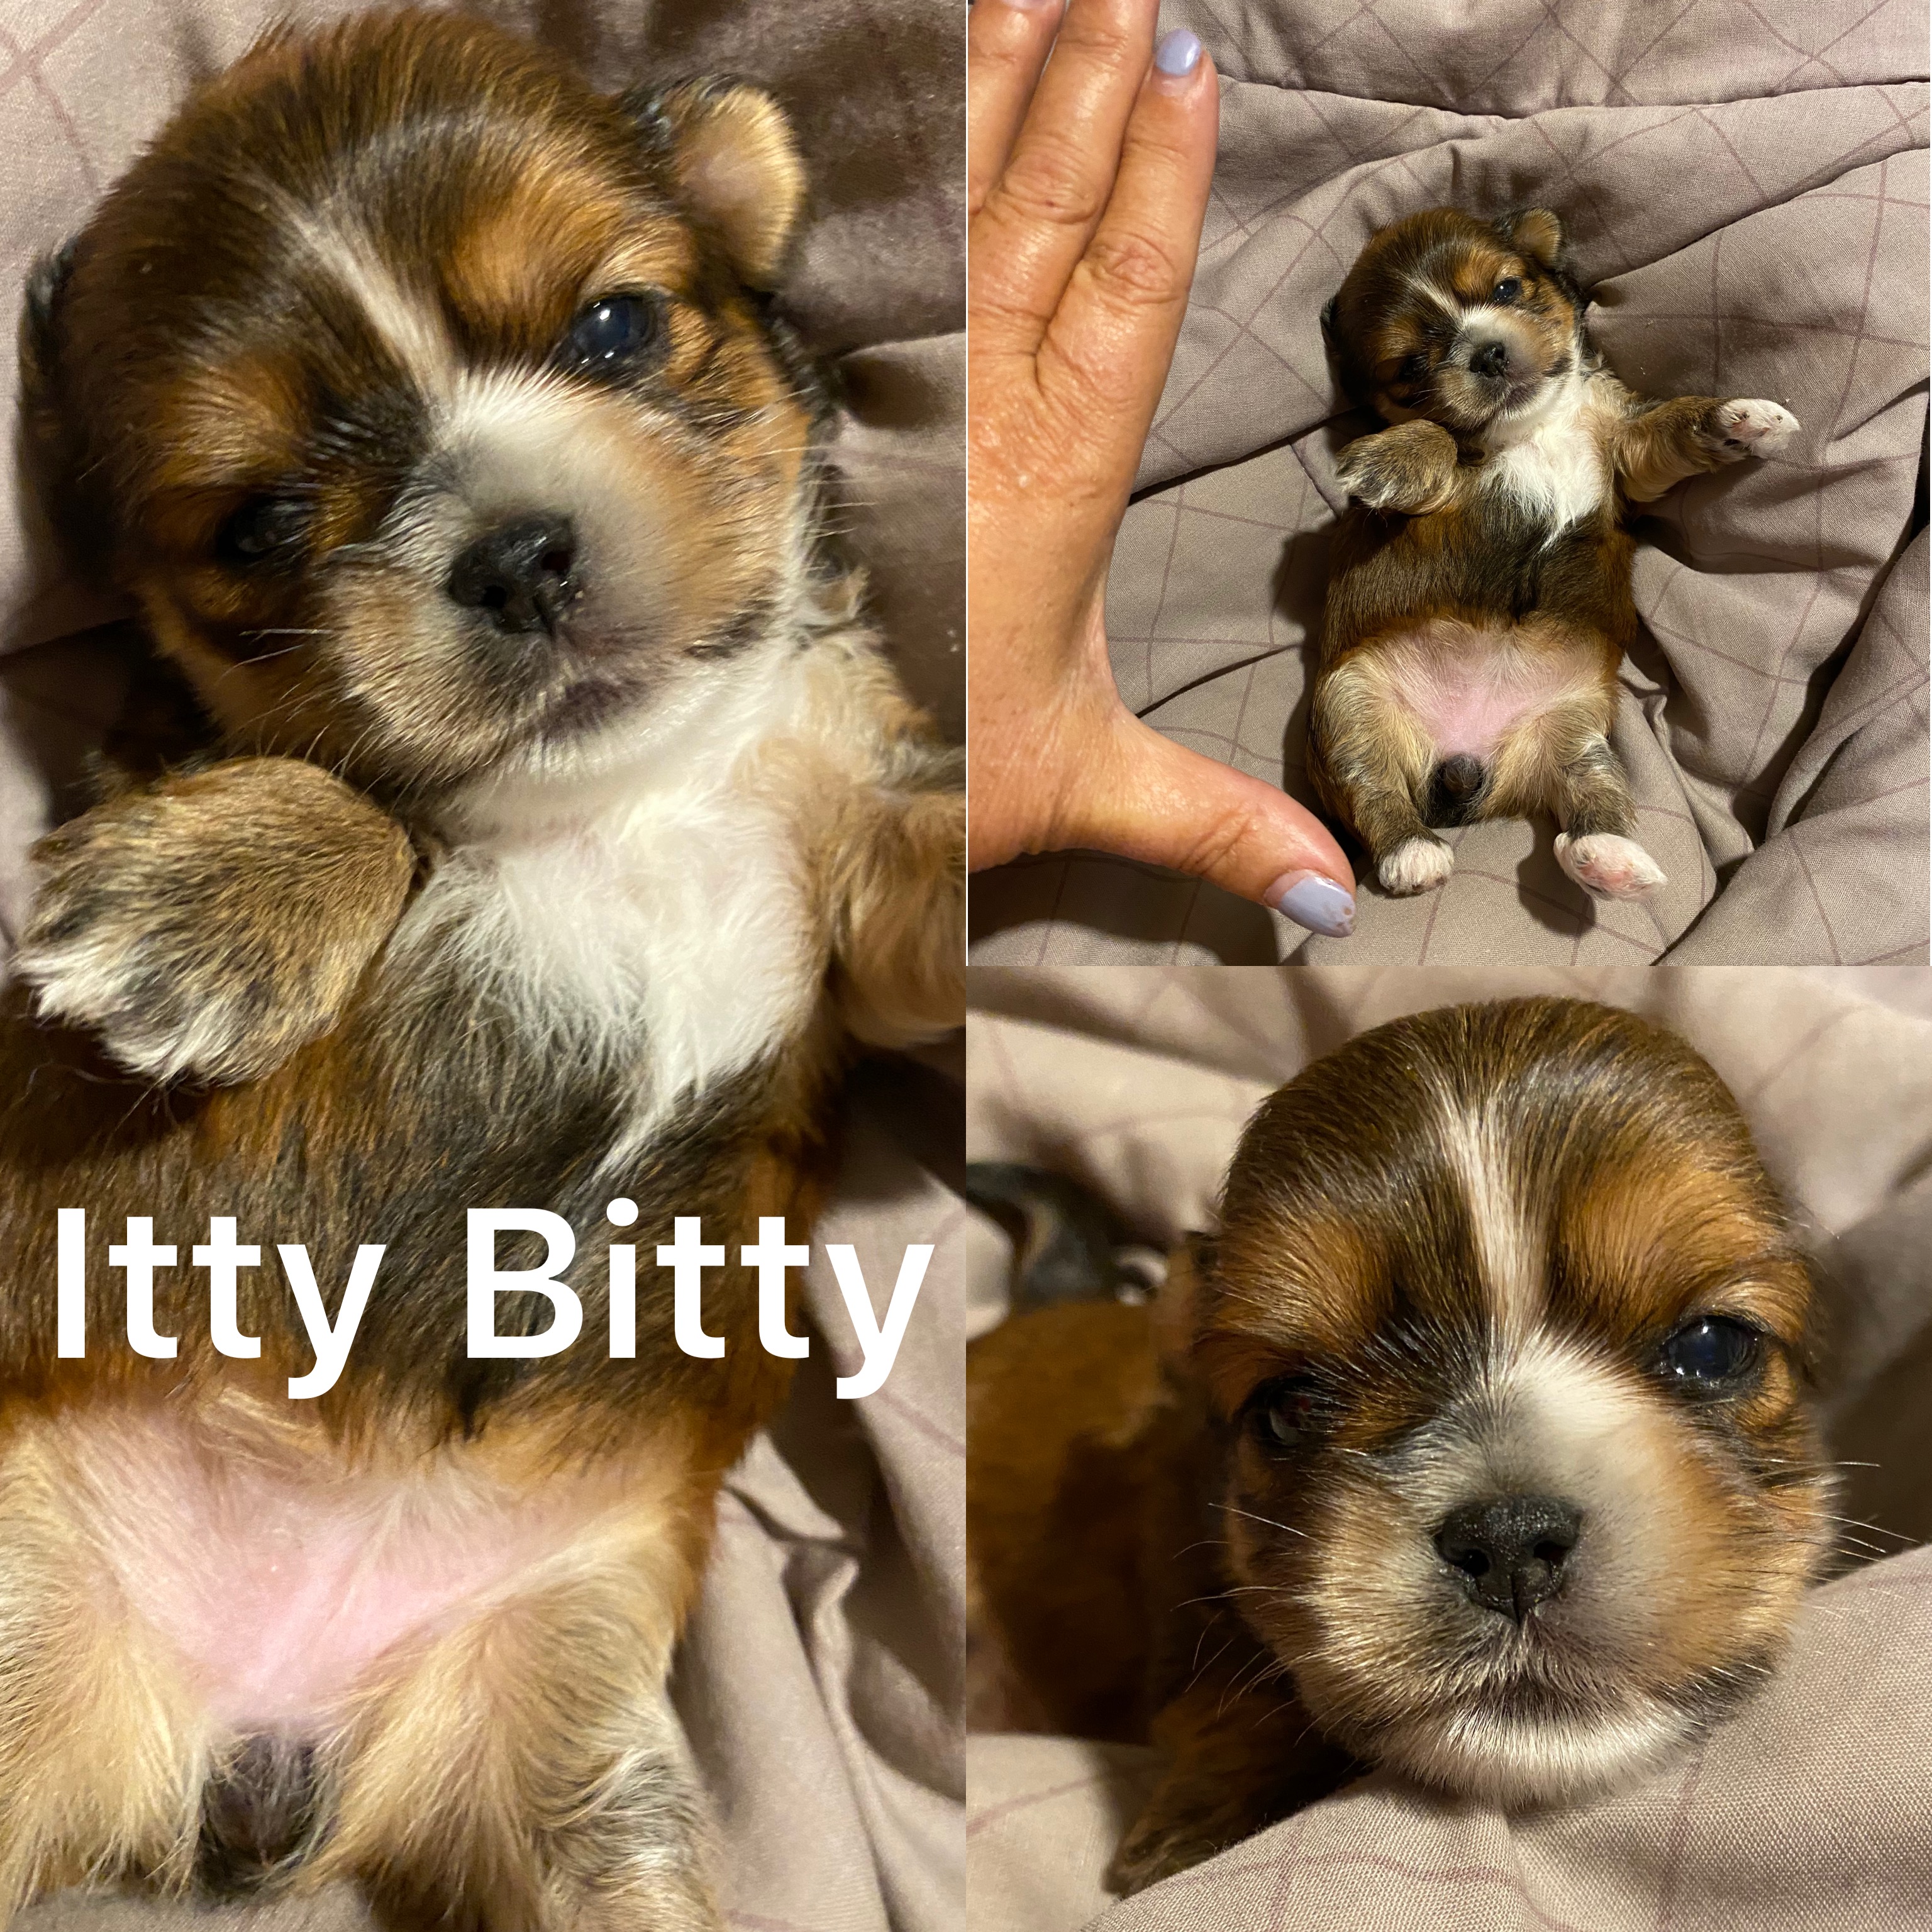 Itty Bitty is ADOPTED!  Not available